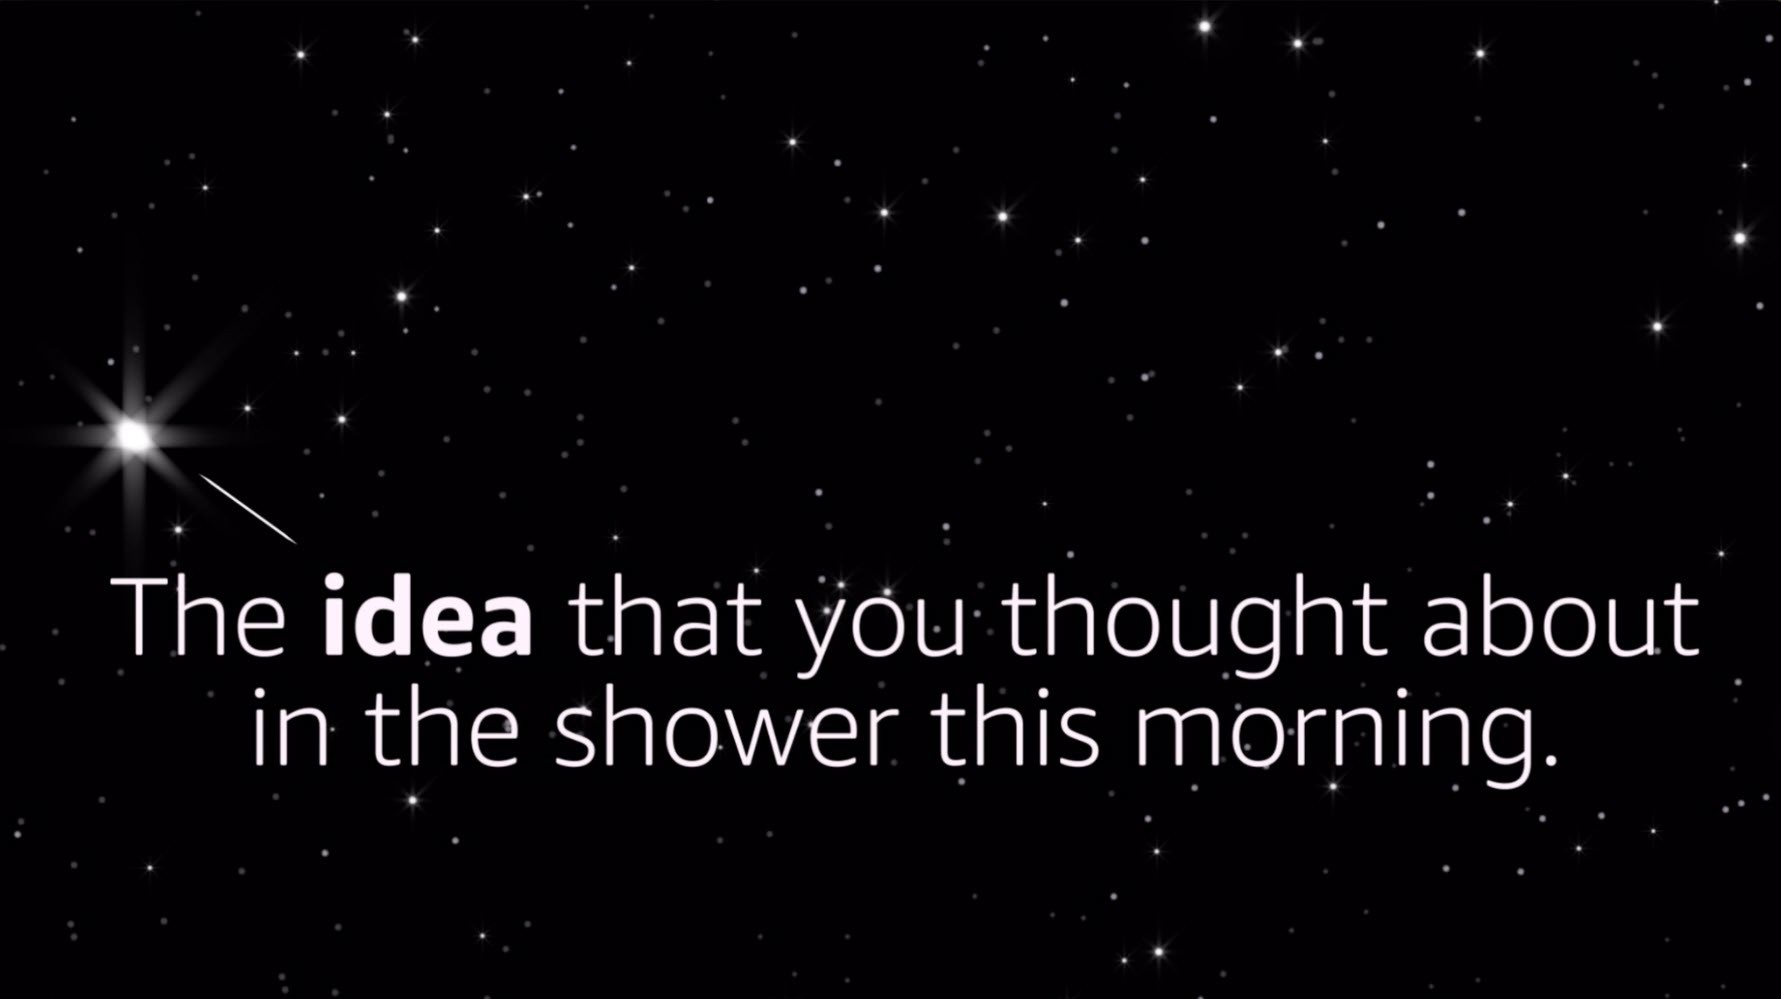 The idea that you thought about in the shower this morning. 